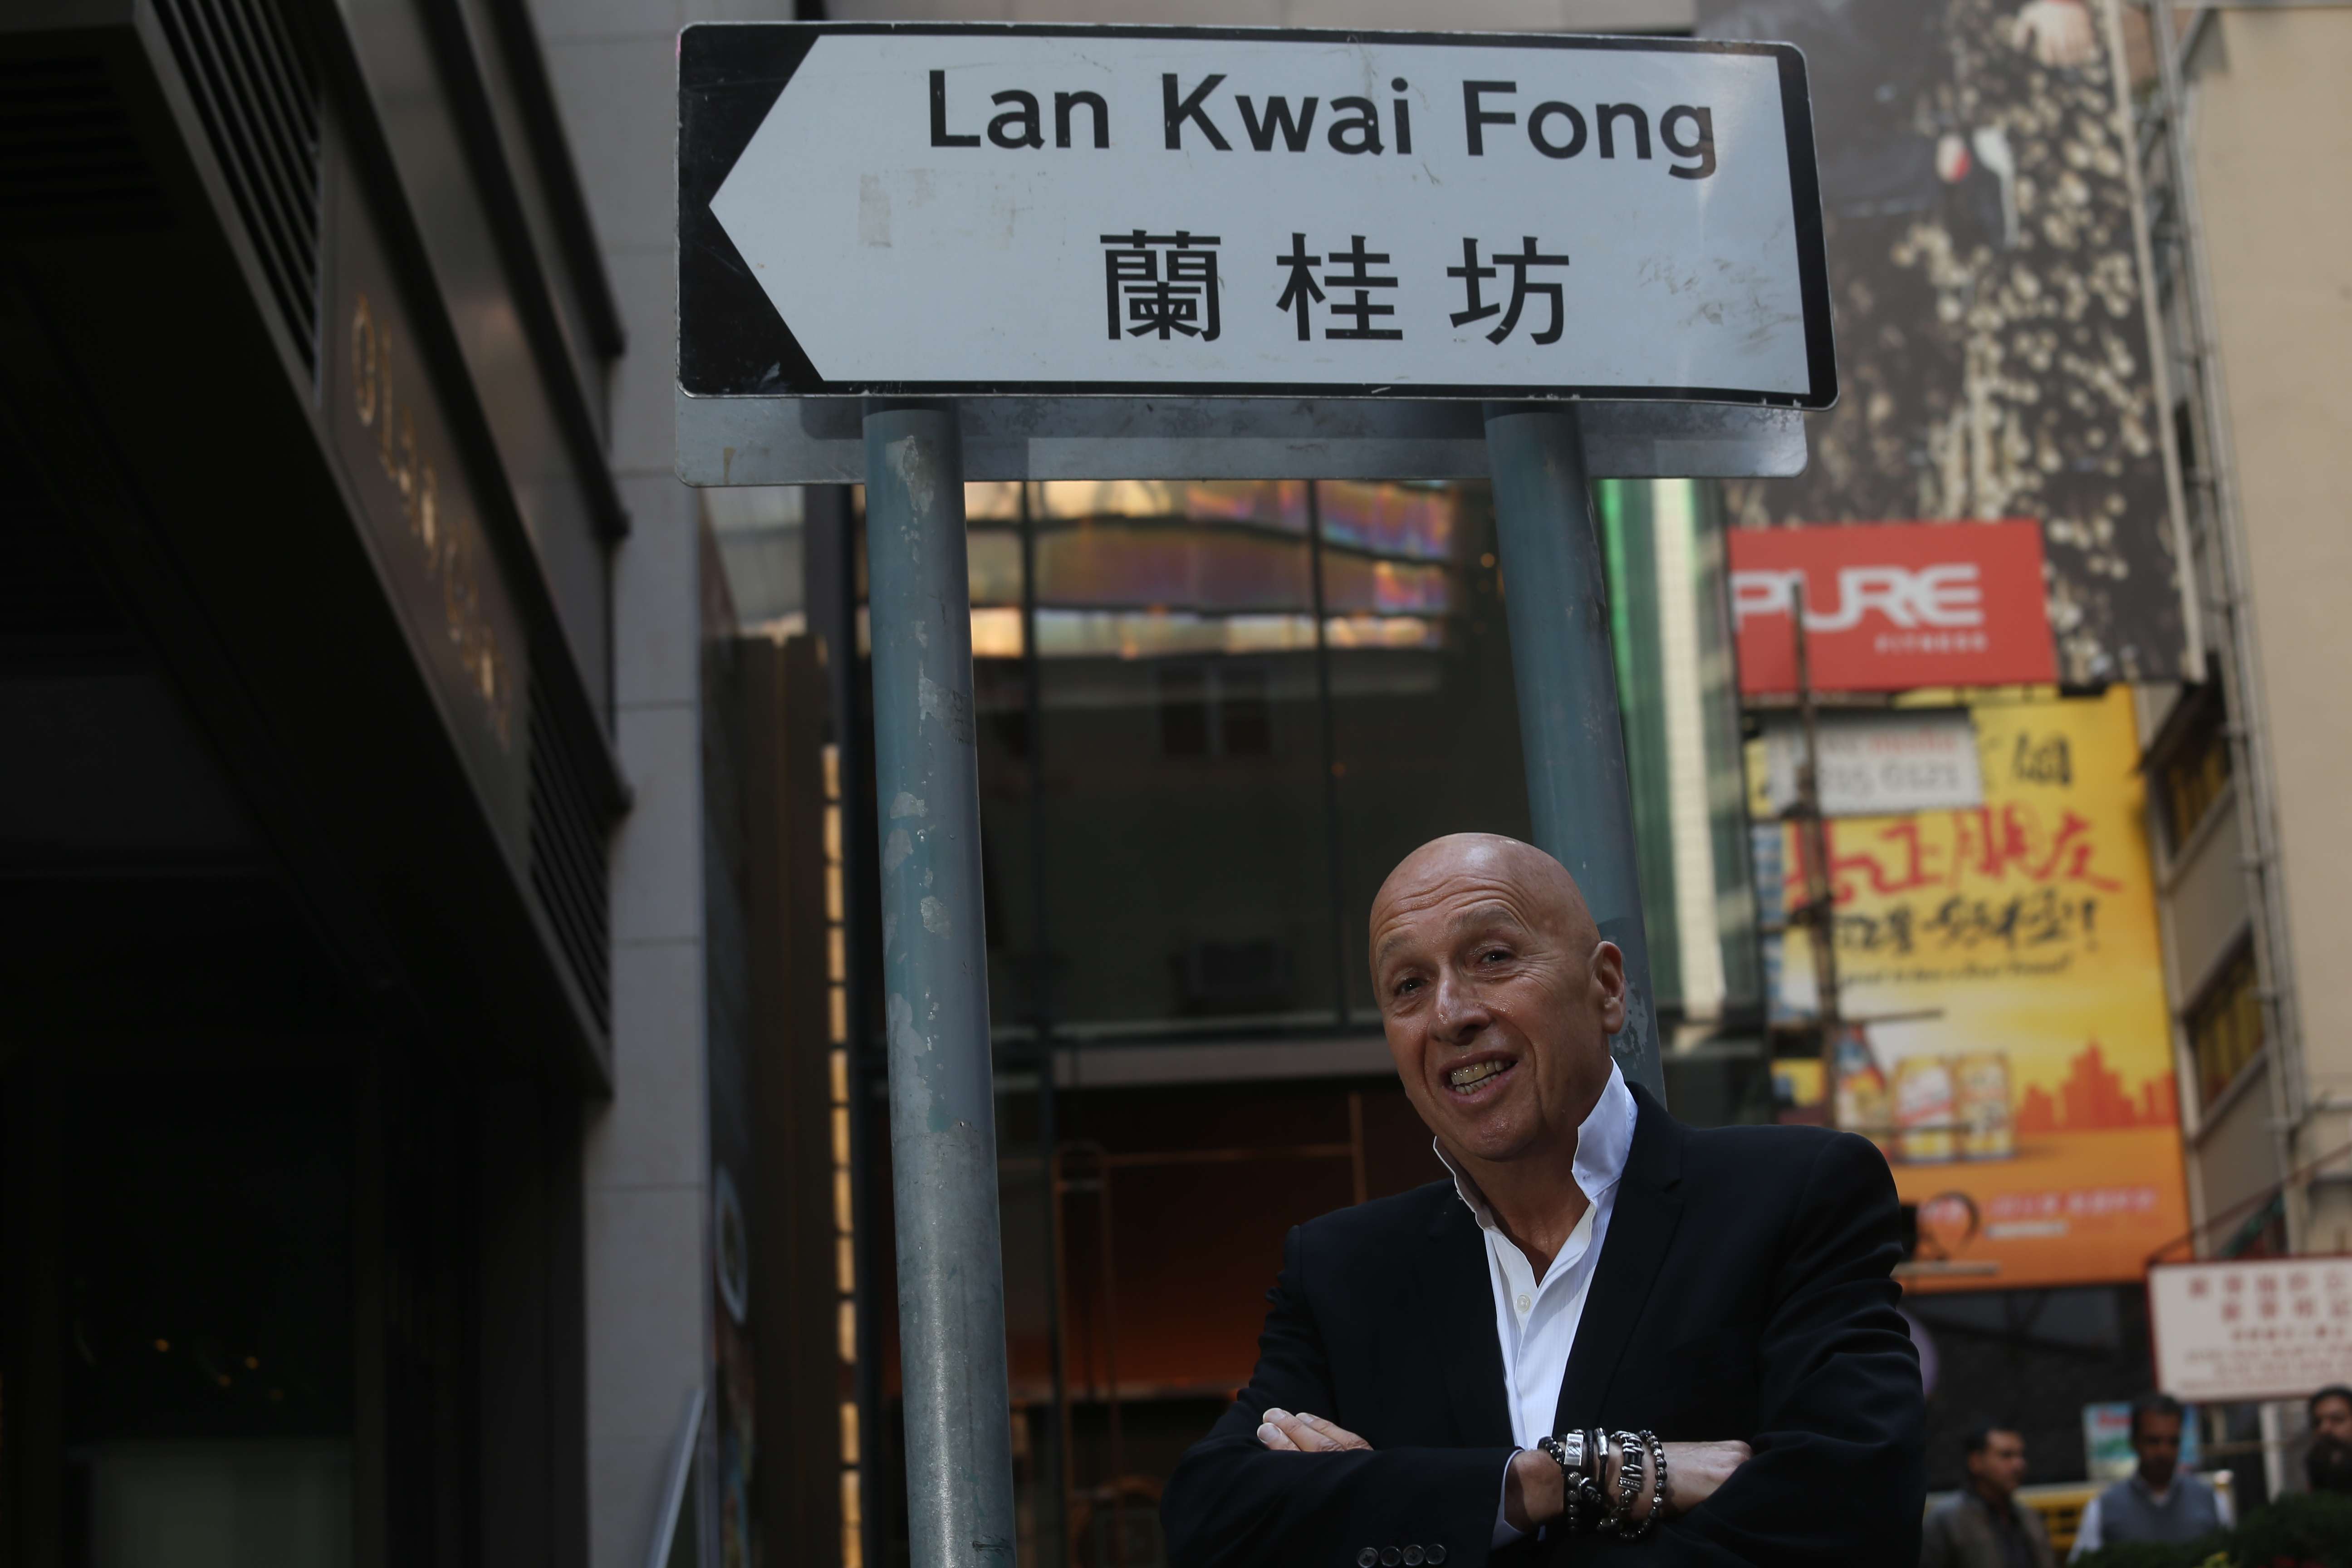 <p>The property and entertainment mogul behind Lan Kwai Fong acknowledges the deeping social divide and urges compassion, innovation</p>